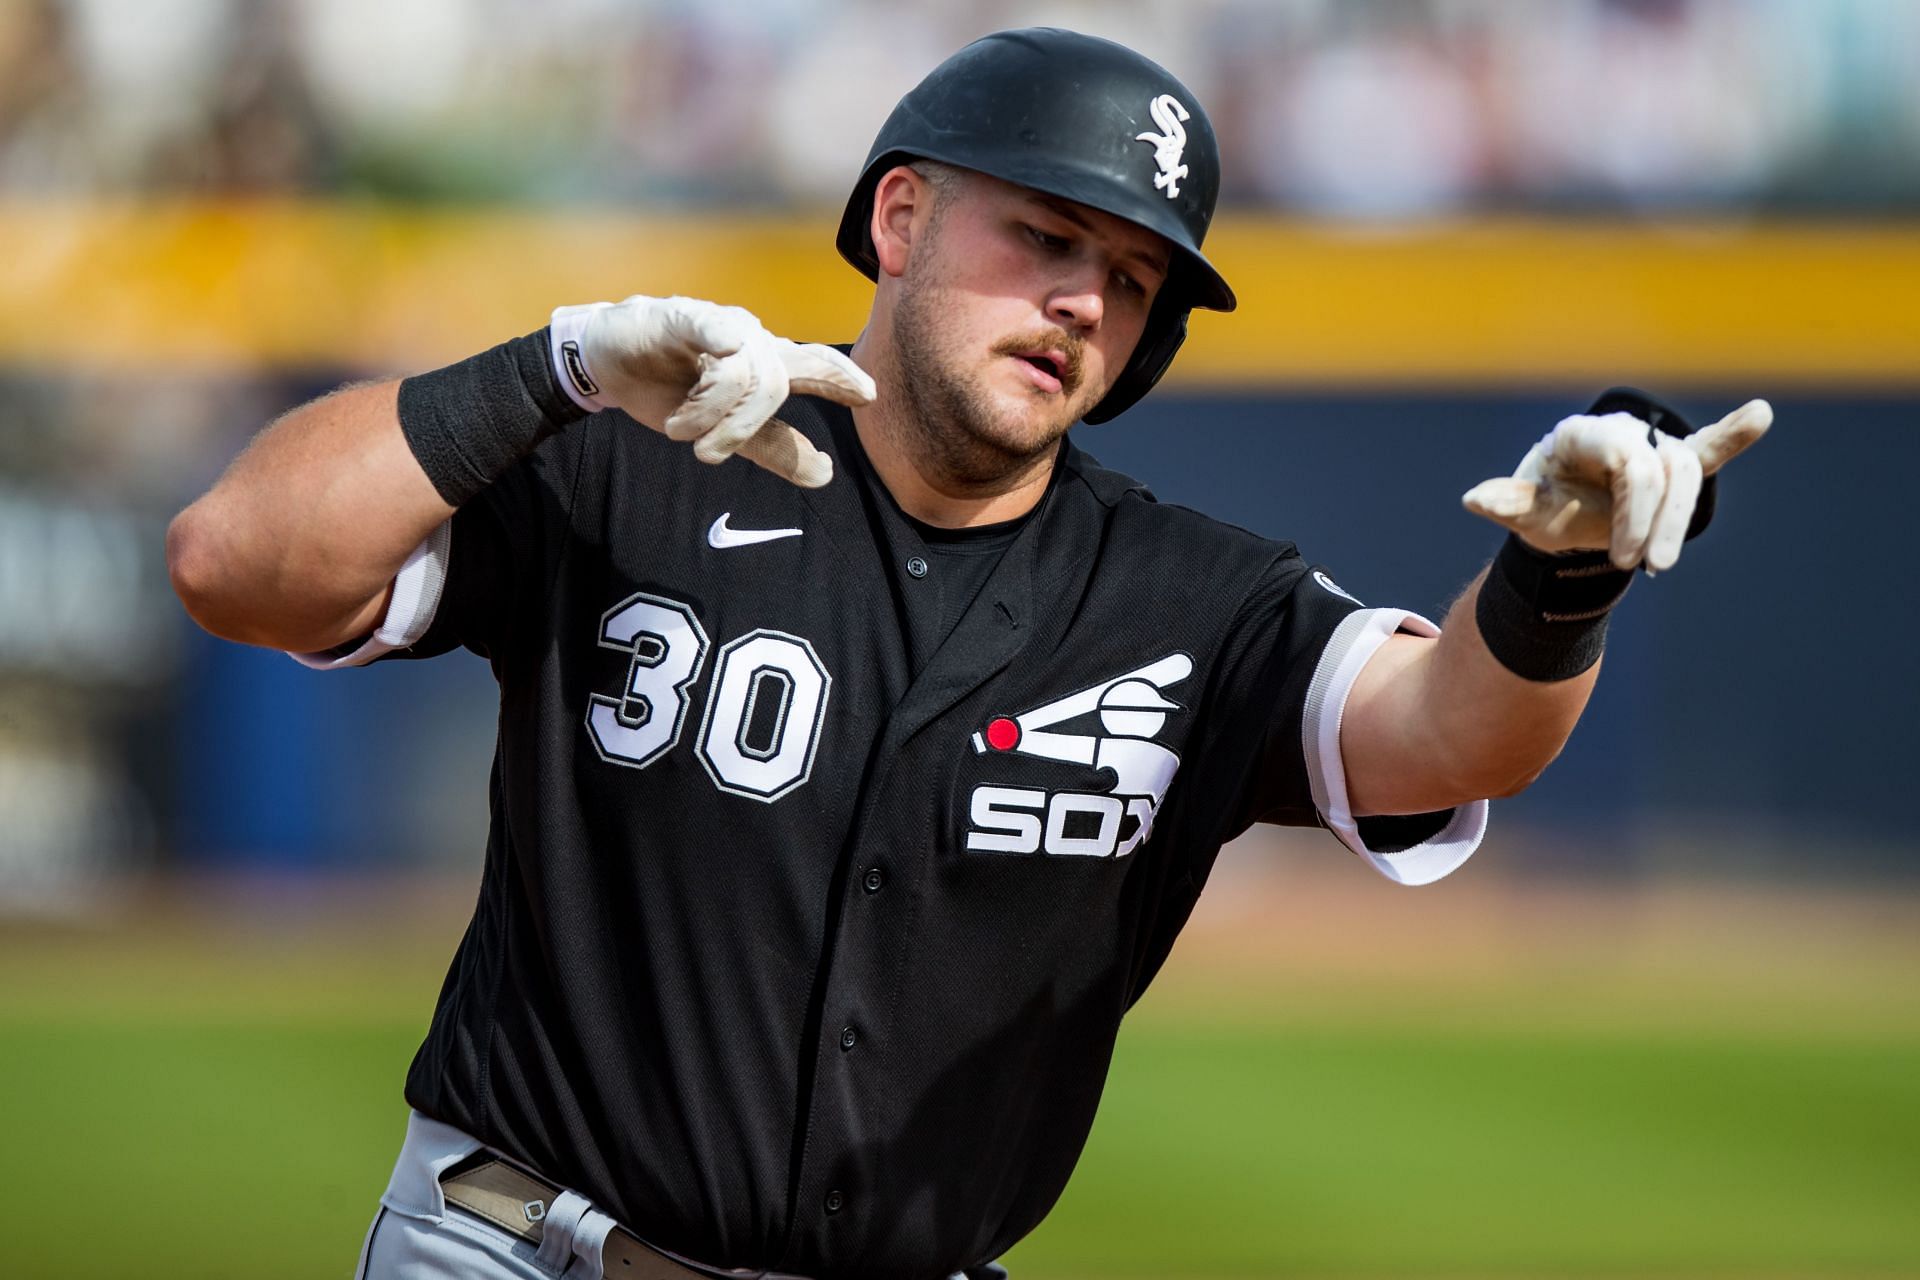 Jake Burger of the Chicago White Sox gestures while rounding the bases after hitting a home run.